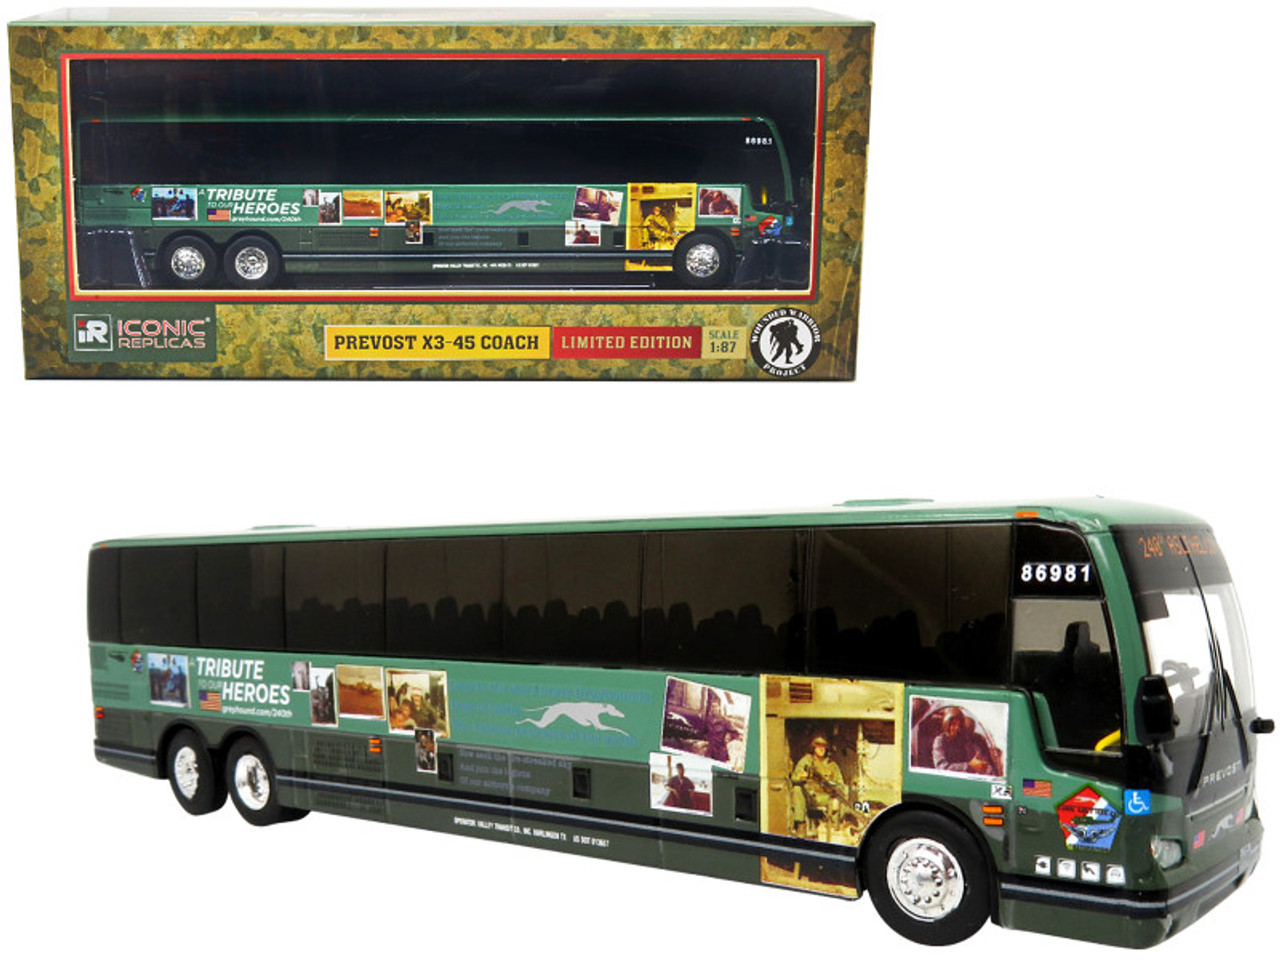 Prevost X3-45 Coach Bus Greyhound Tribute to our Heroes "240th ASLT HEL CO" "The Bus & Motorcoach Collection" 1/87 Diecast Model by Iconic Replicas